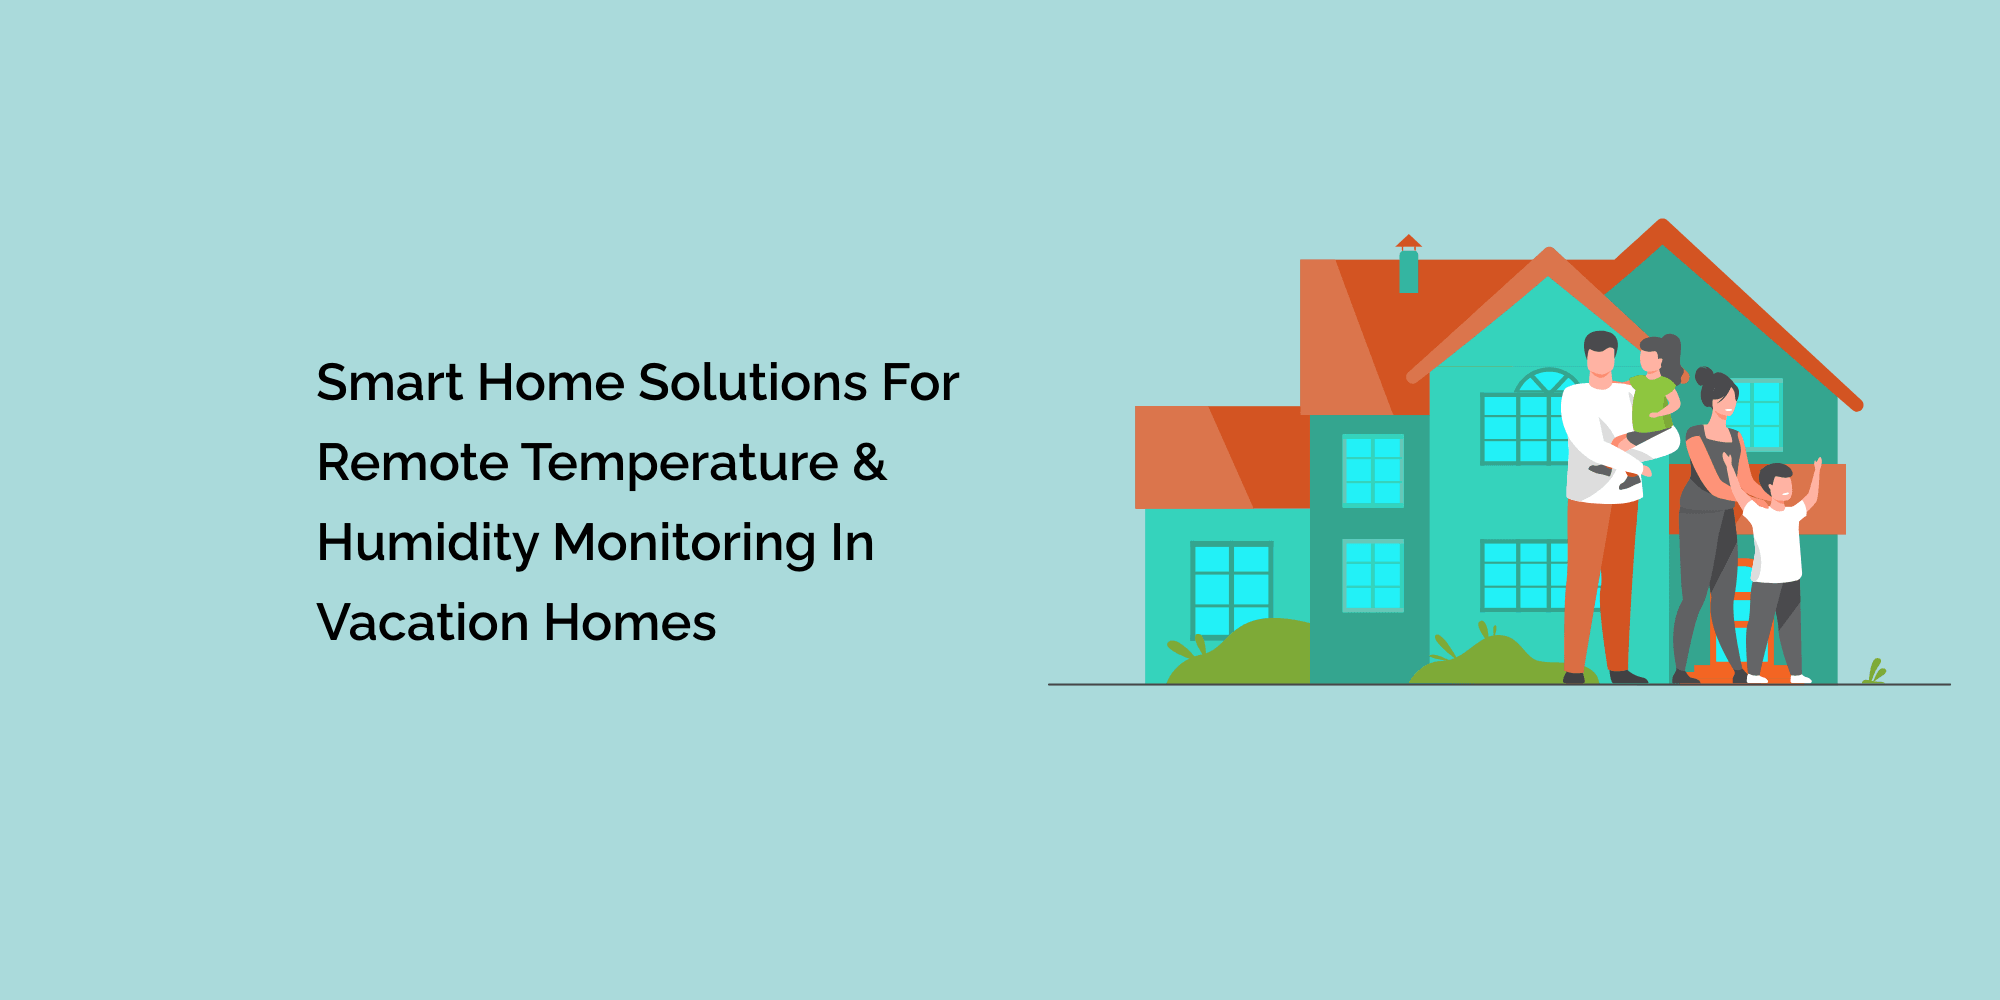 Smart Home Solutions for Remote Temperature & Humidity Monitoring in Vacation Homes